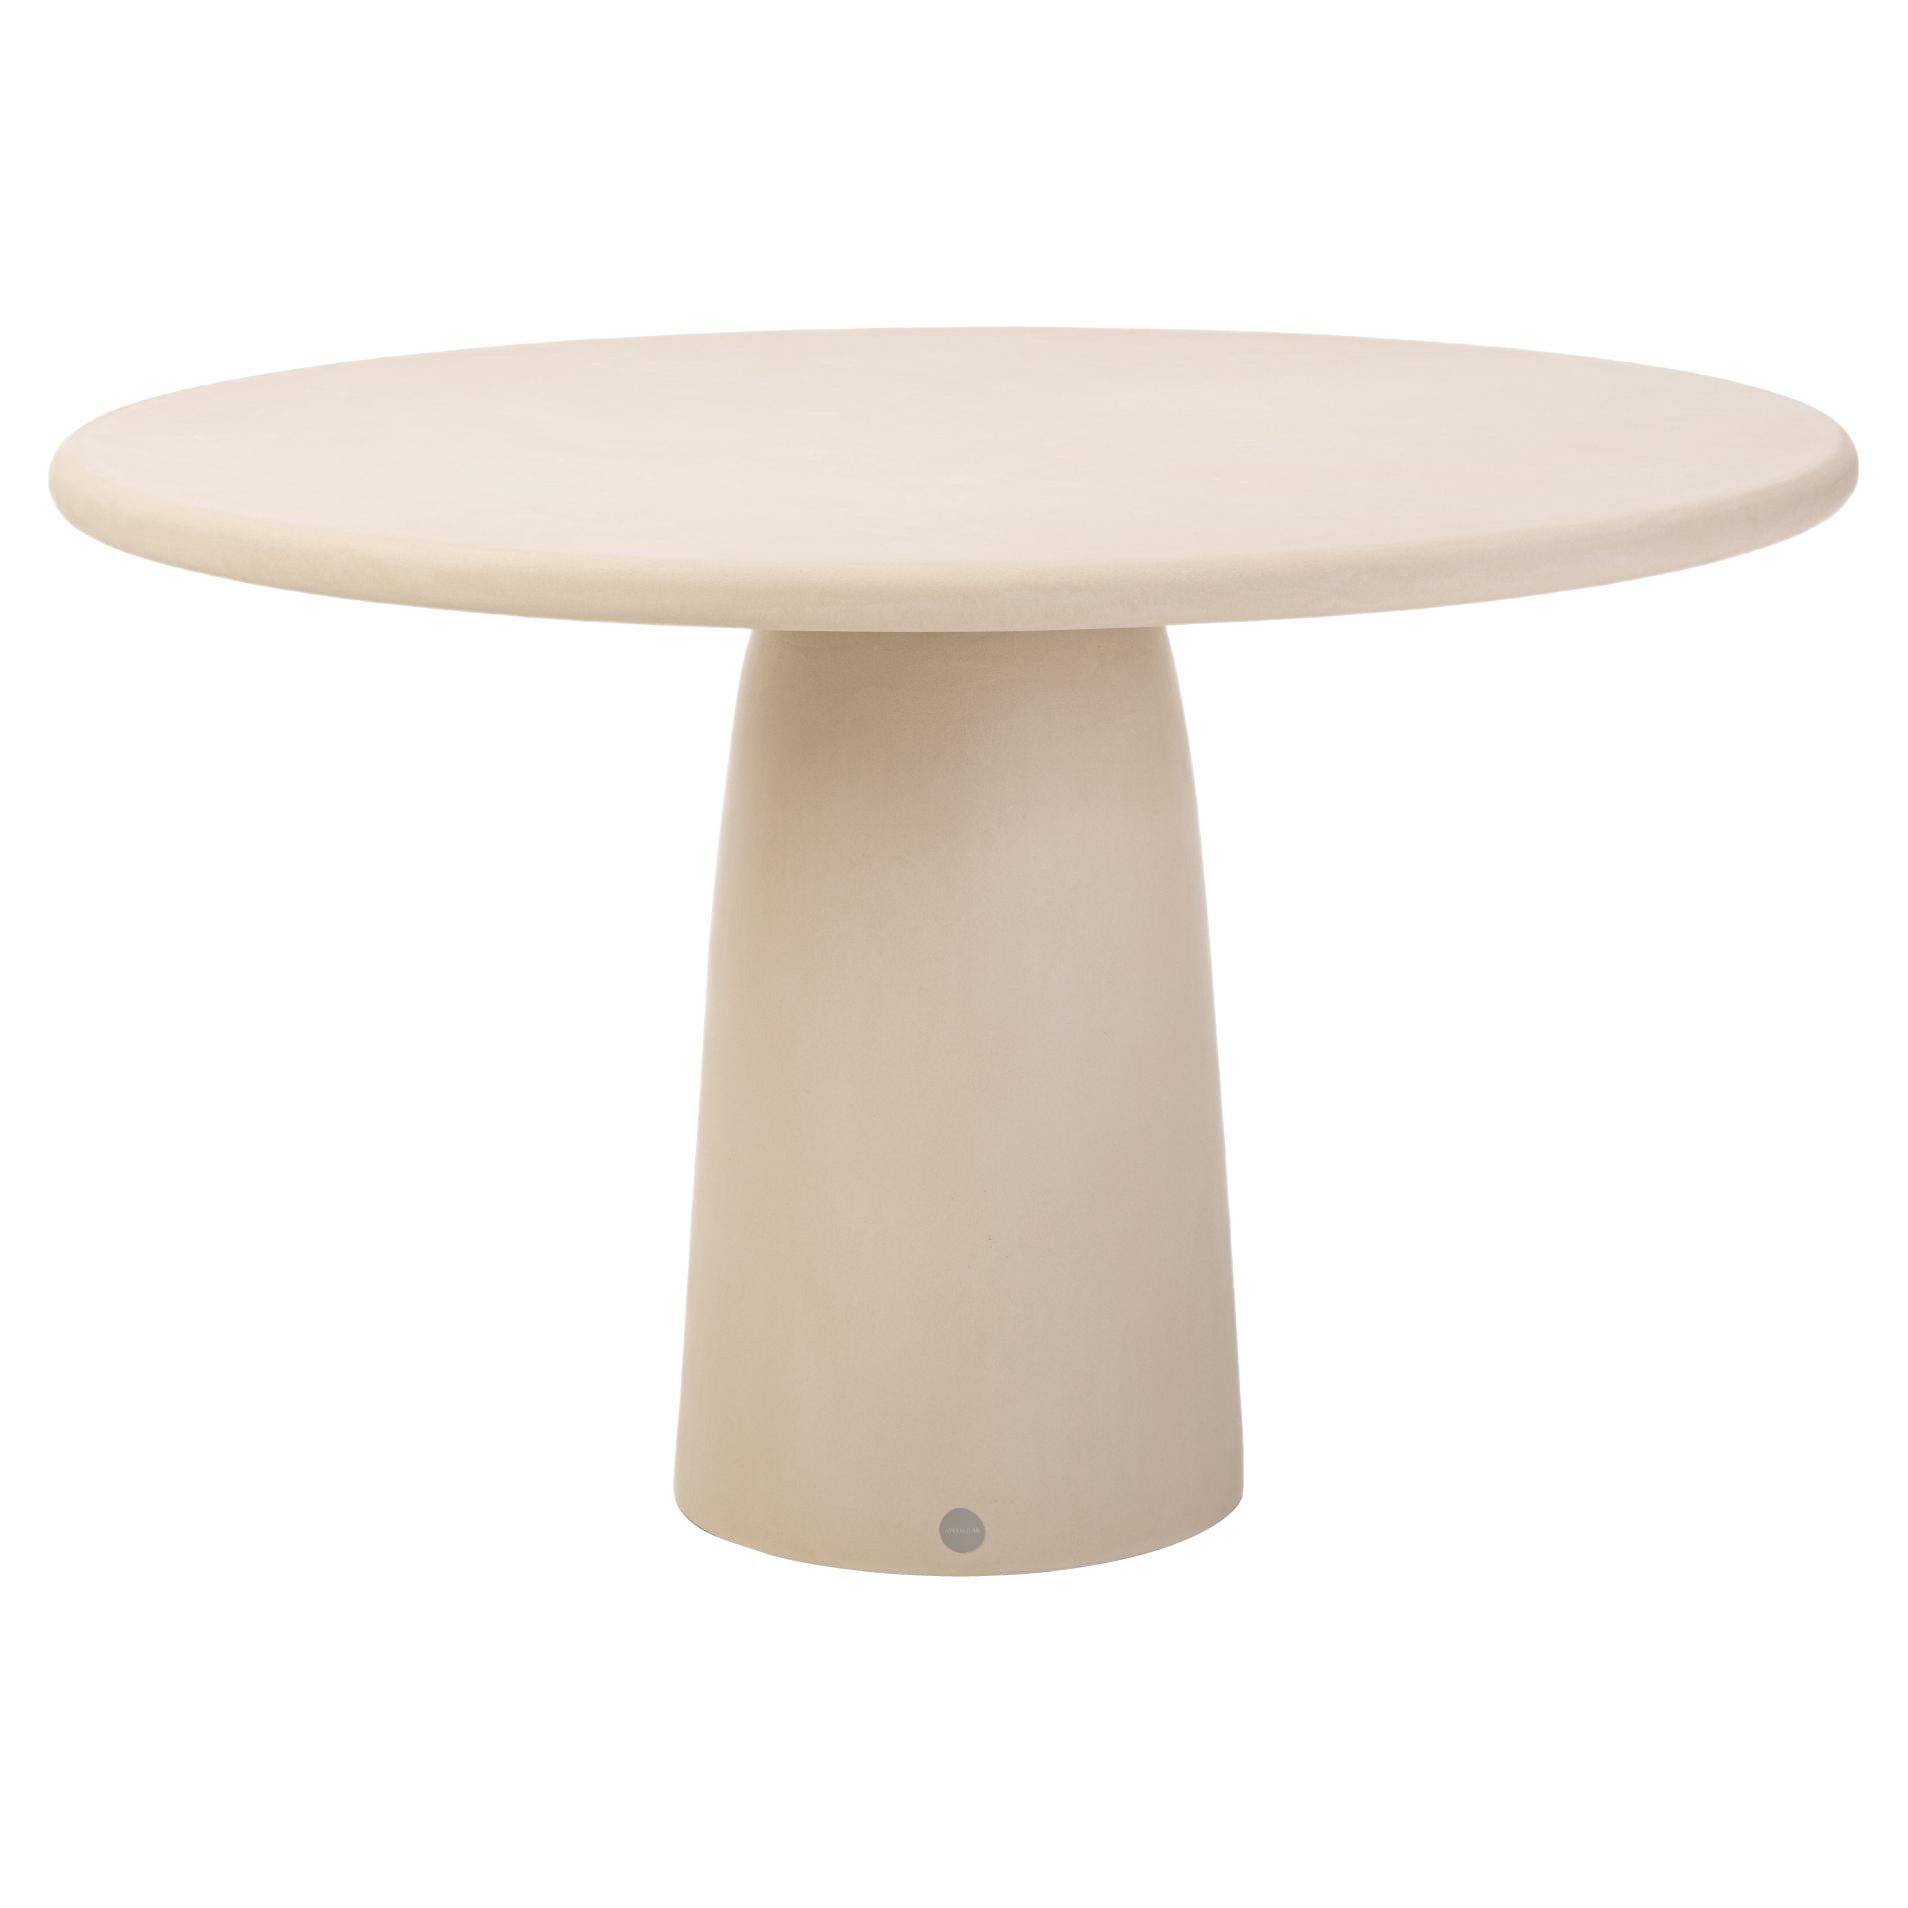 Contemporary Round Natural Plaster "Menhir" Table 160cm by Isabelle Beaumont